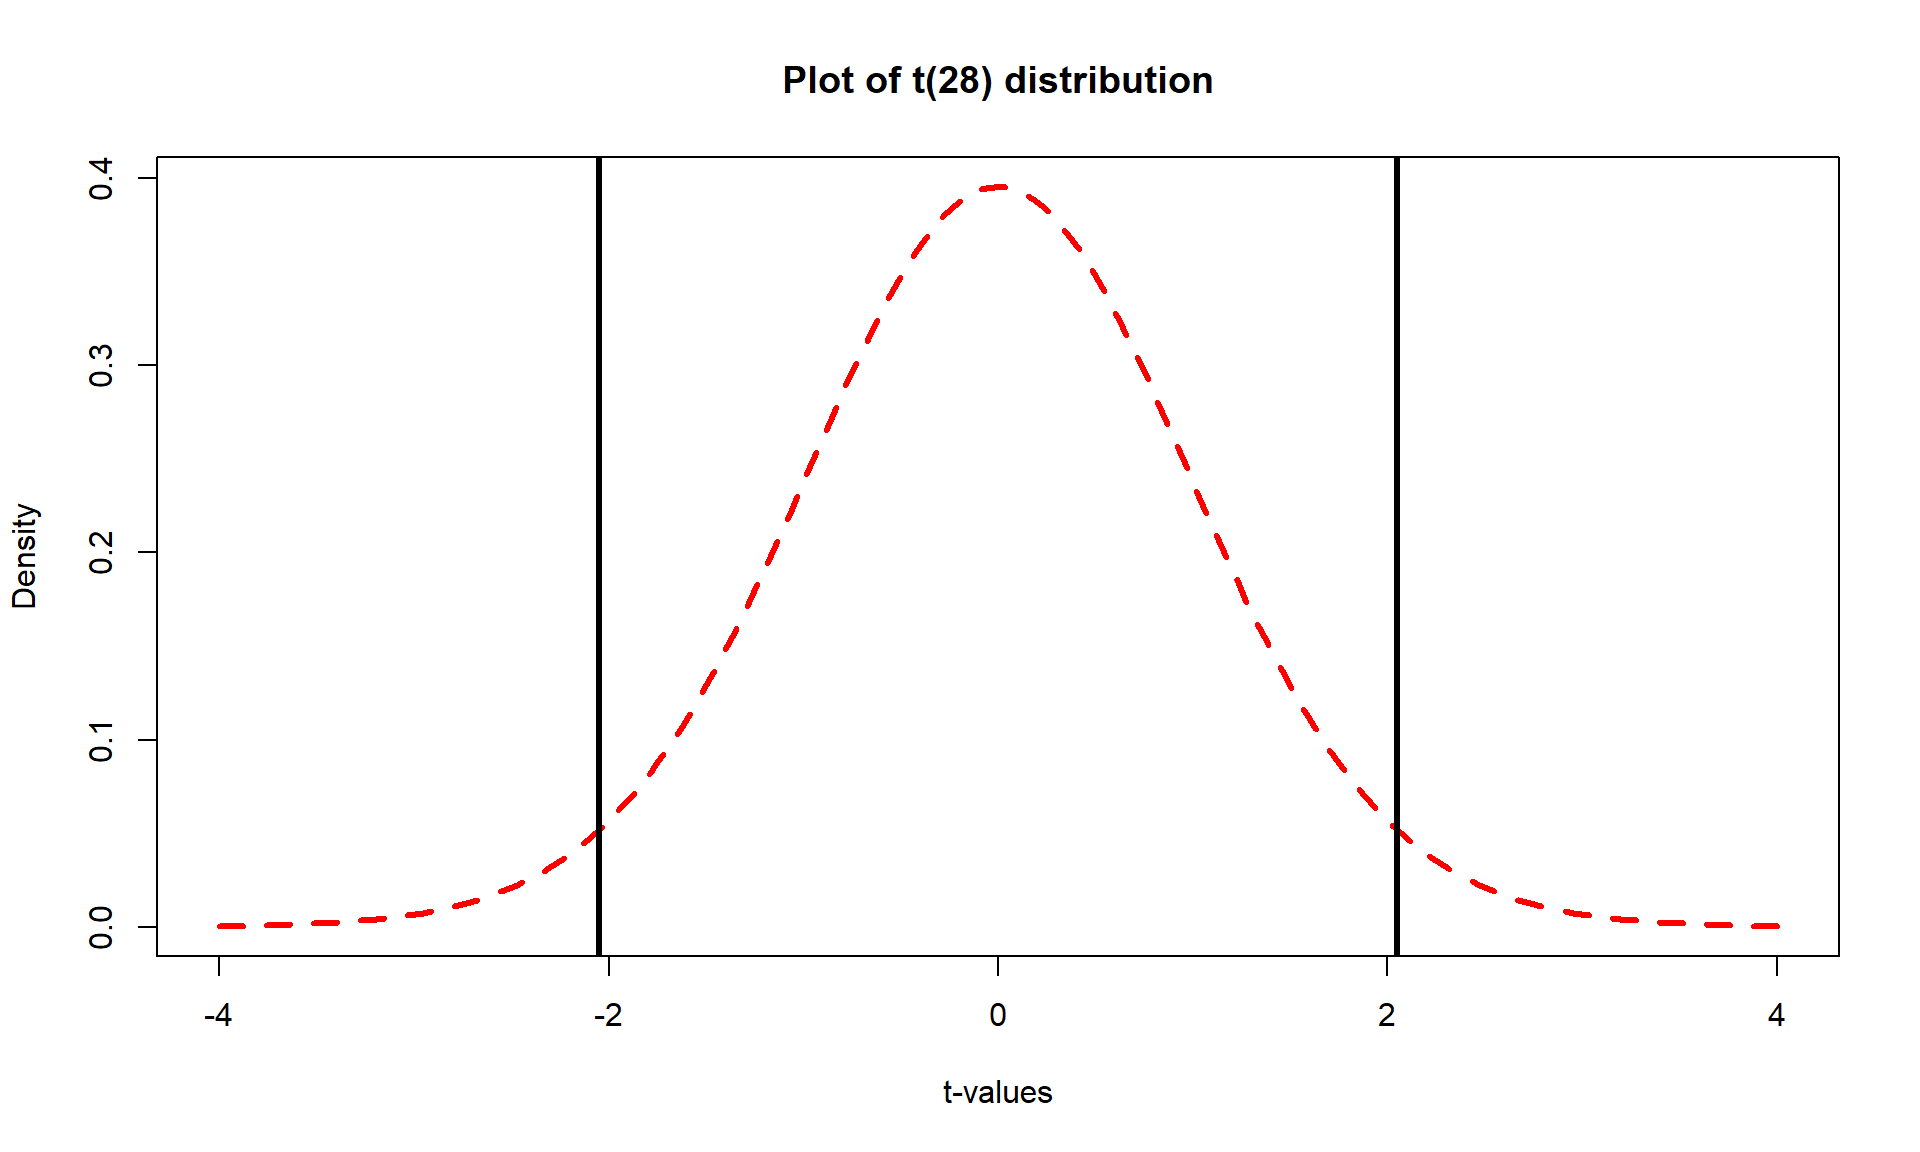 Plot of \(t(28)\) with cut-offs for putting 95% of distribution in the middle that delineate the \(t^*\) multiplier to make a 95% confidence interval.